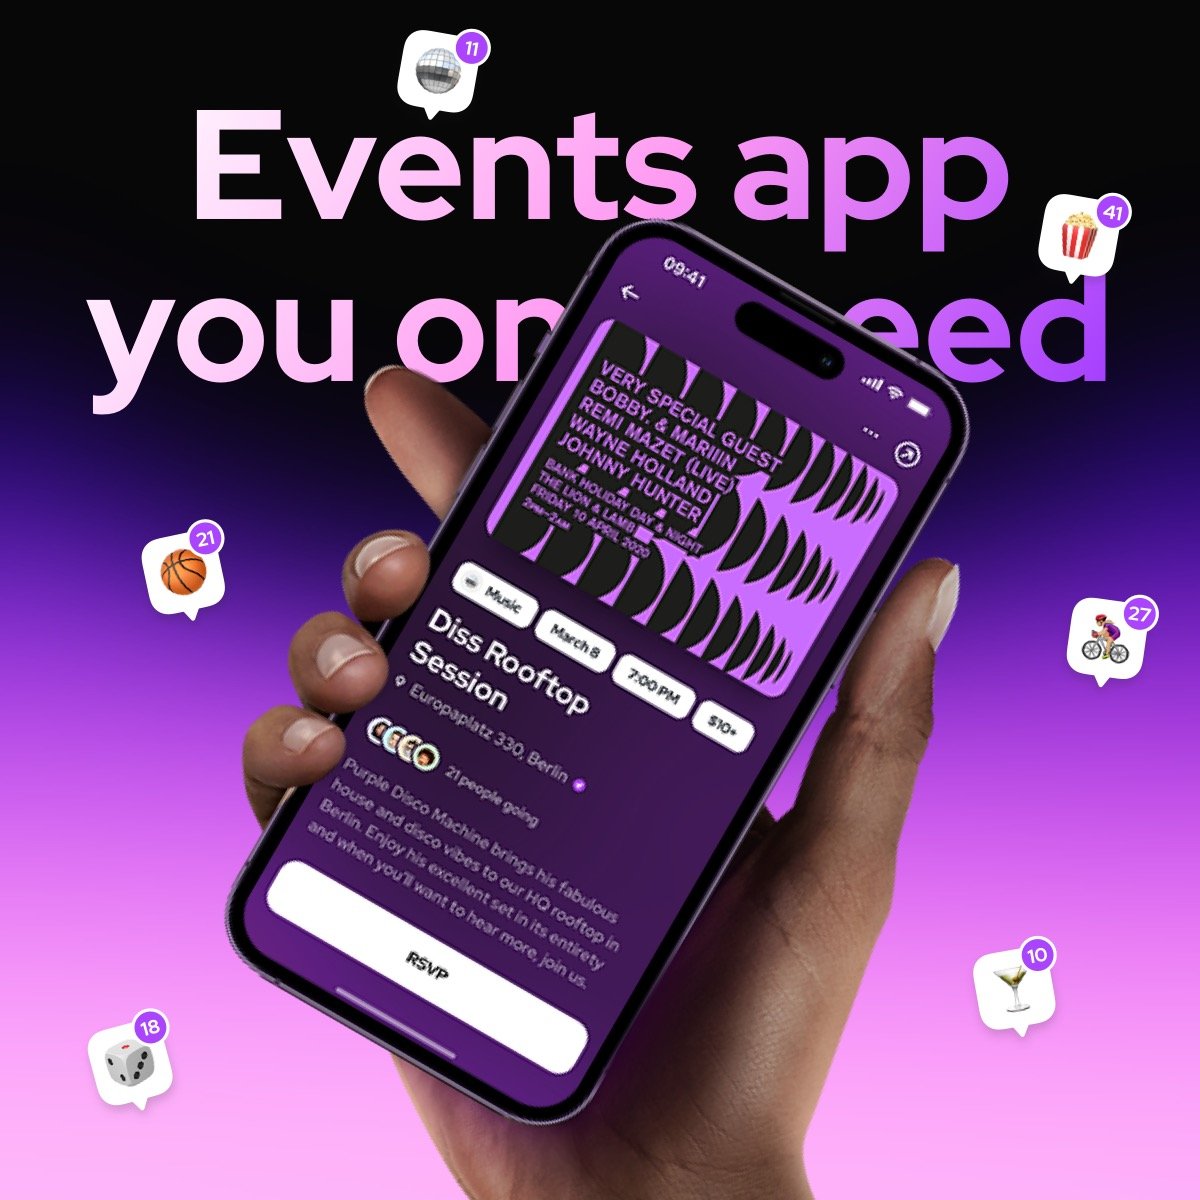 Vently (Discover events near you)